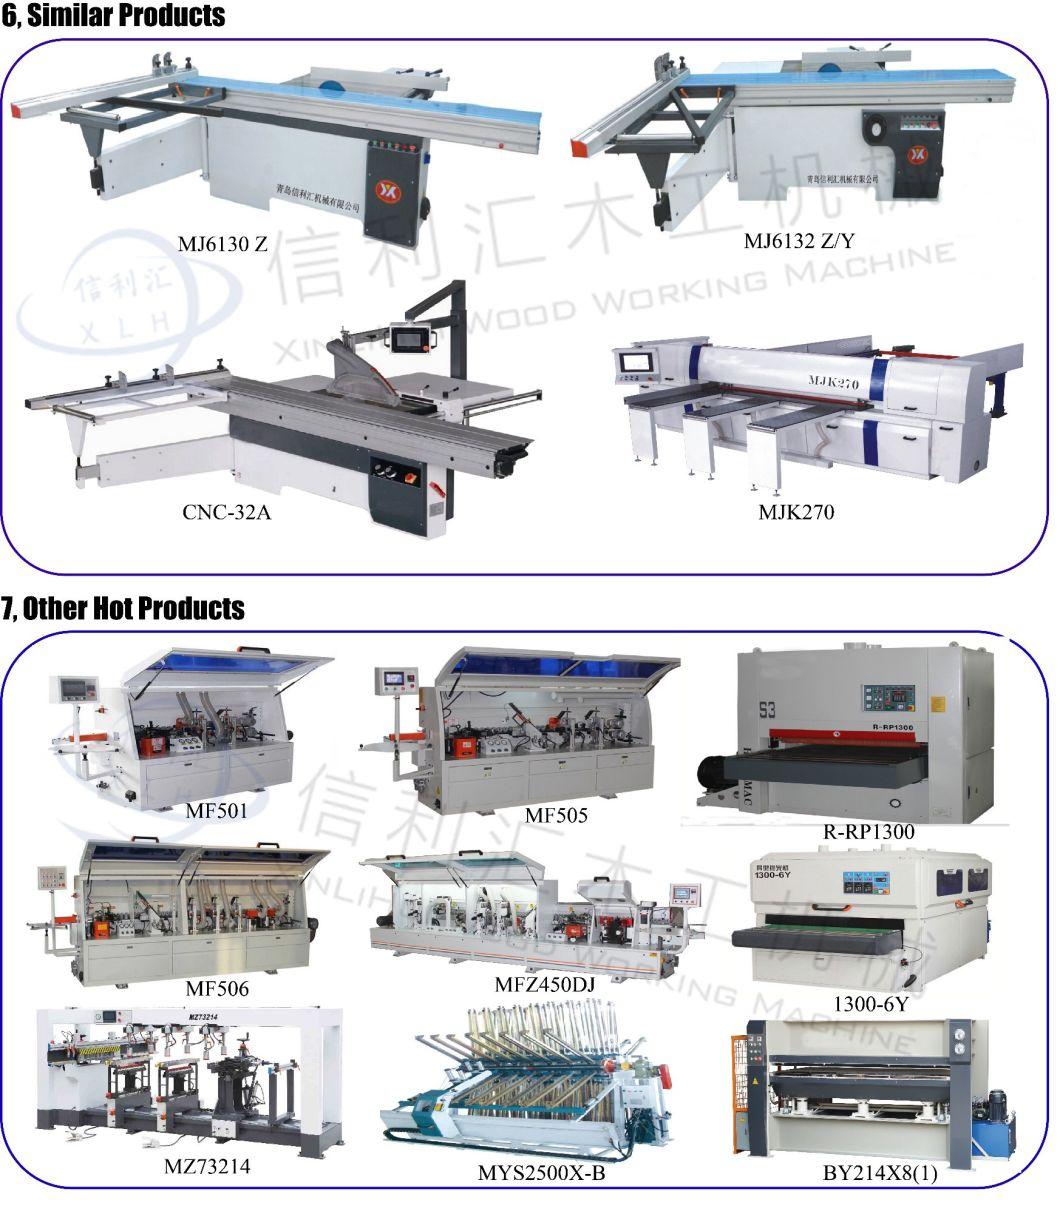 Full Automatic Plywood Four Edge Trimming Saw Price Edge Sawing for Plywood, Particle Board and Other Wood Based-Panels